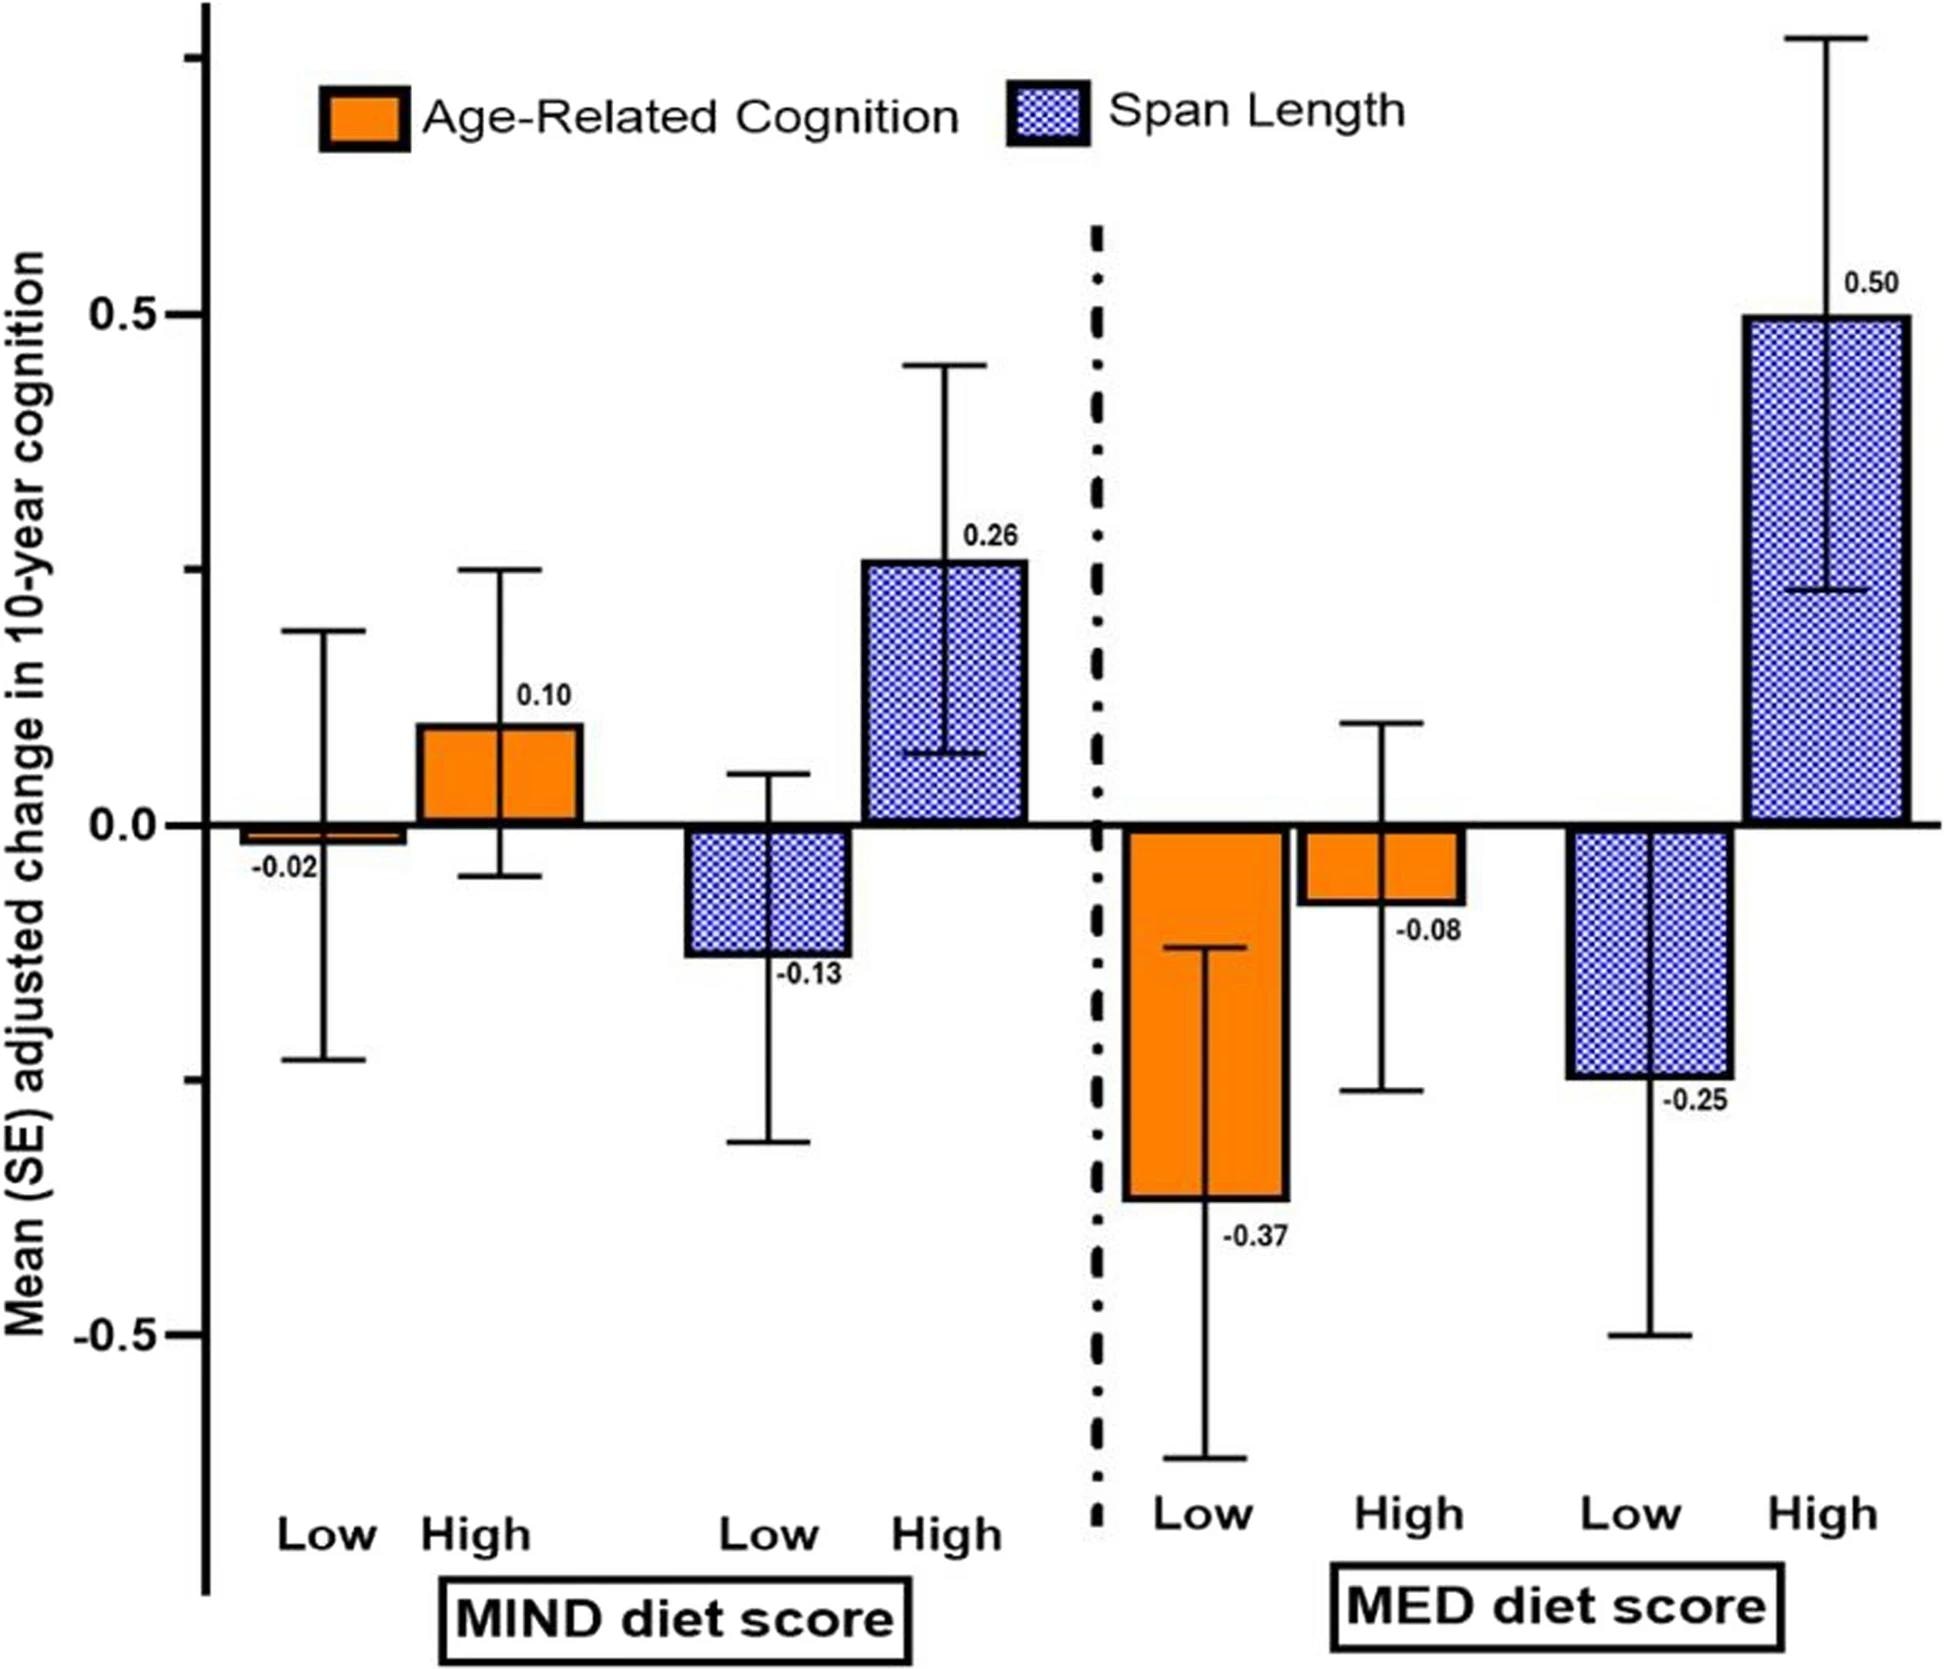 Adjusted mean change (SE).  Age-related cognition and spatial span length in MZ twins for MIND and MED diet scores over 10 years